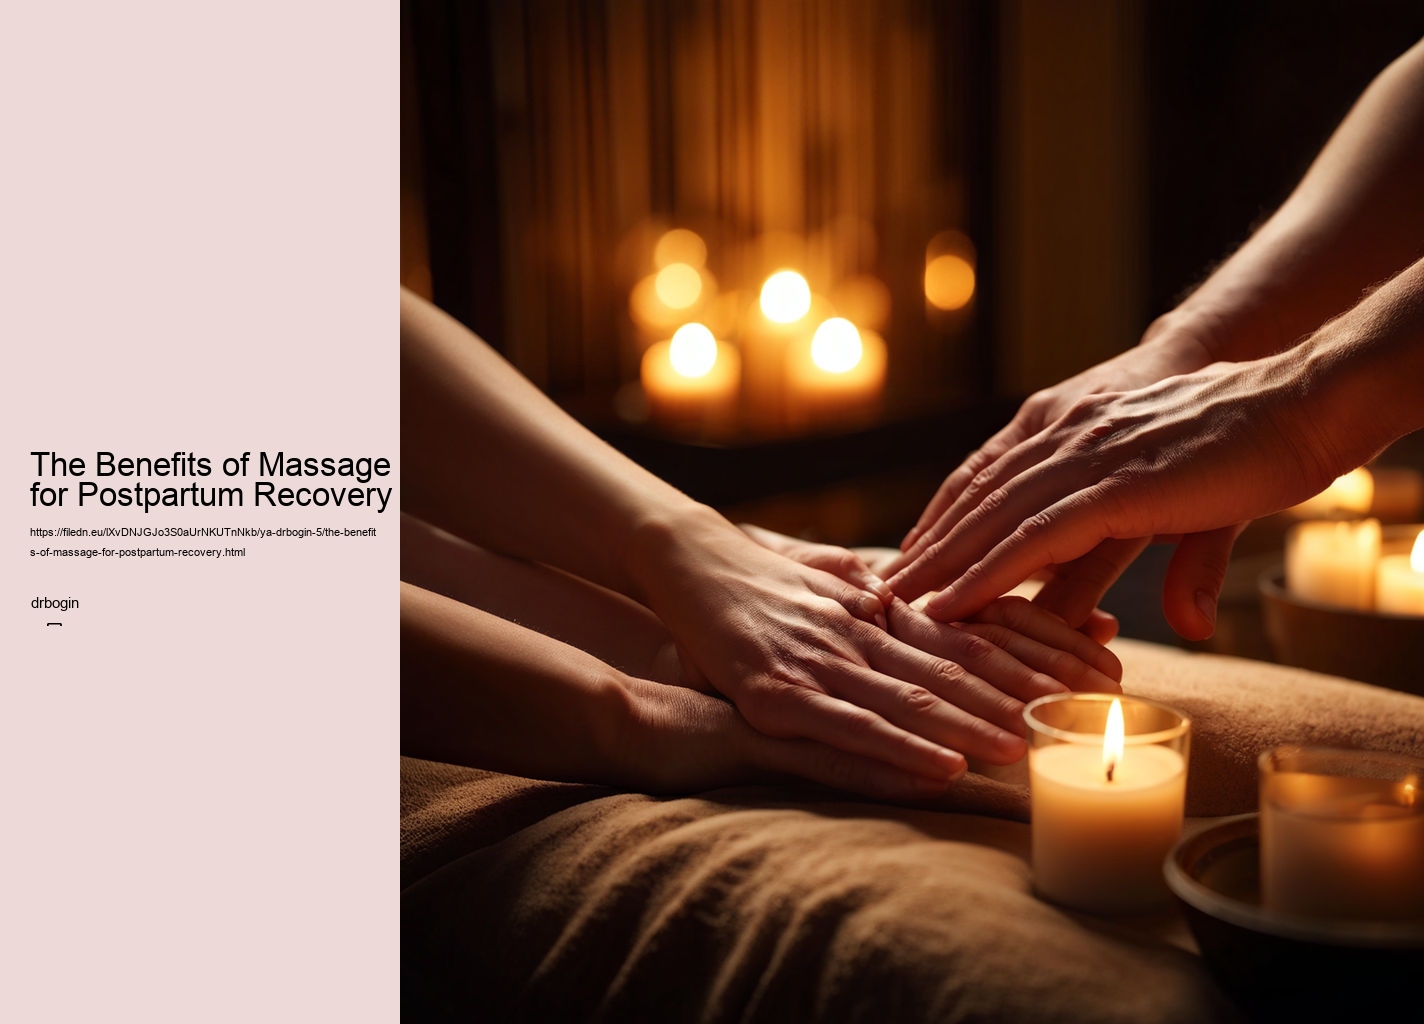 The Benefits of Massage for Postpartum Recovery